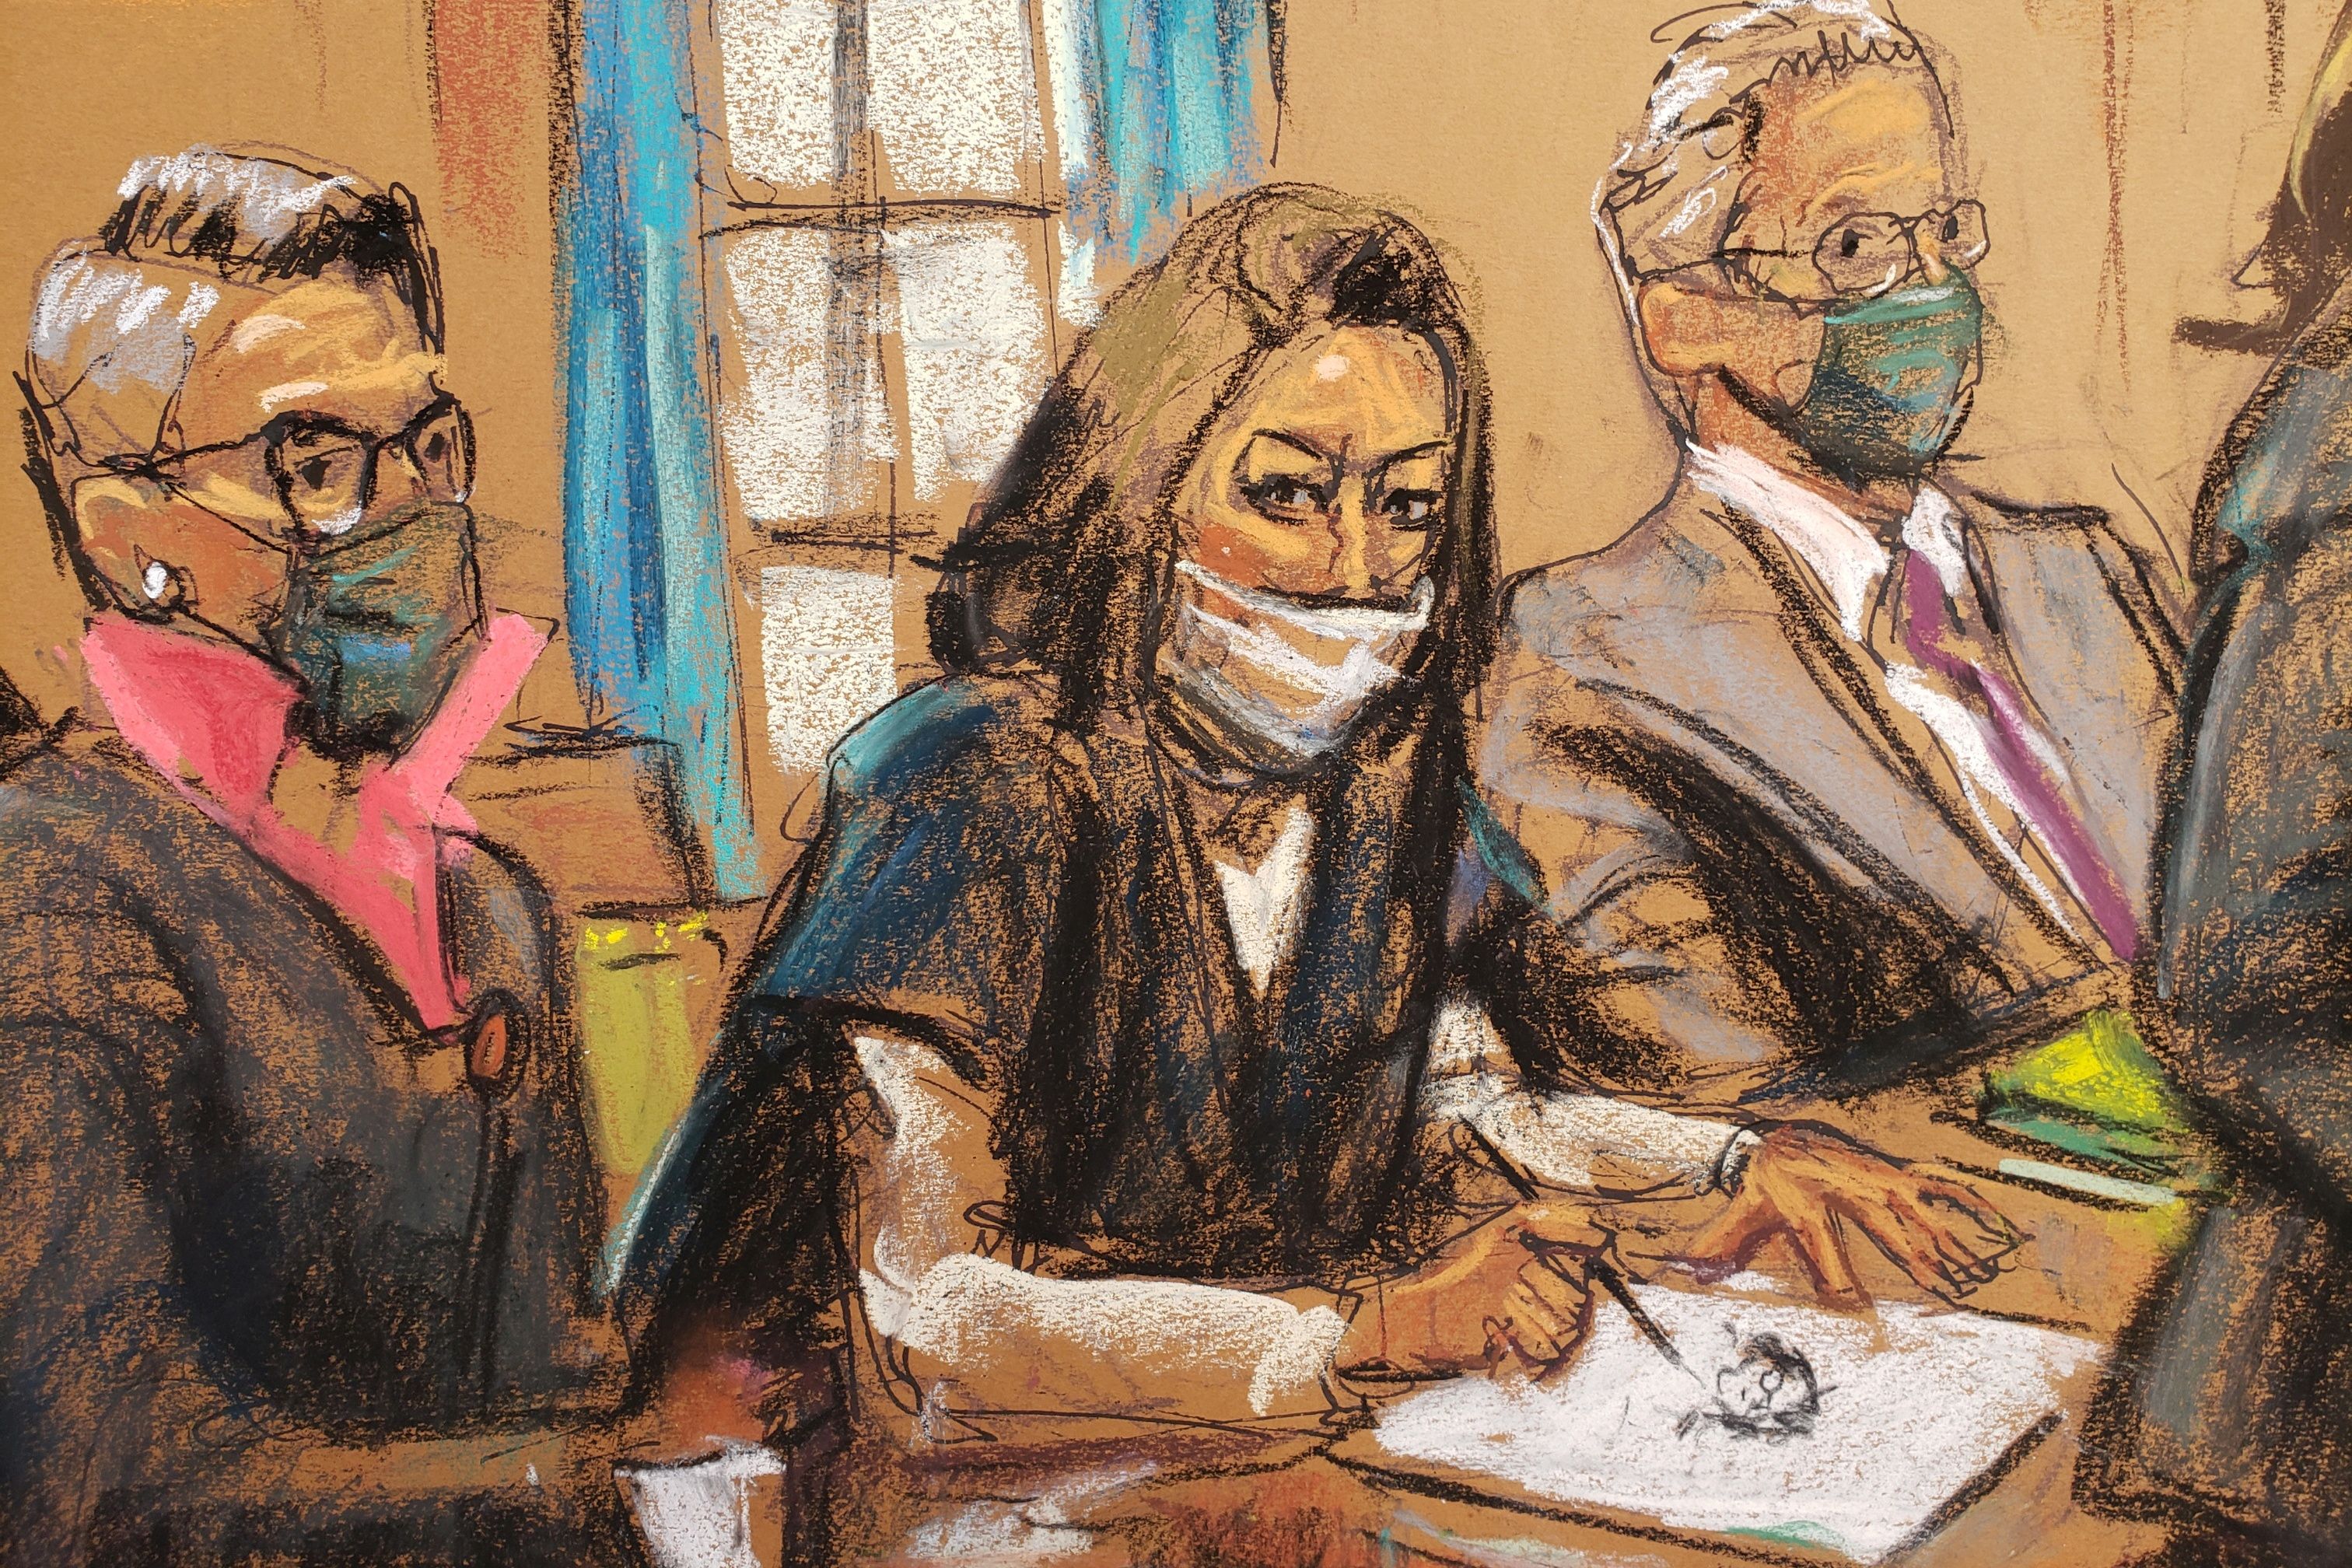 Ghislaine Maxwell, the Jeffrey Epstein associate accused of sex trafficking, makes a sketch of court artists while seated between defense attorneys Bobbi Sternheim and Jeffrey Pagliuca, during a pre-trial hearing ahead of jury selection, in a courtroom sketch in New York City, U.S., November 1, 2021. REUTERS/Jane Rosenberg